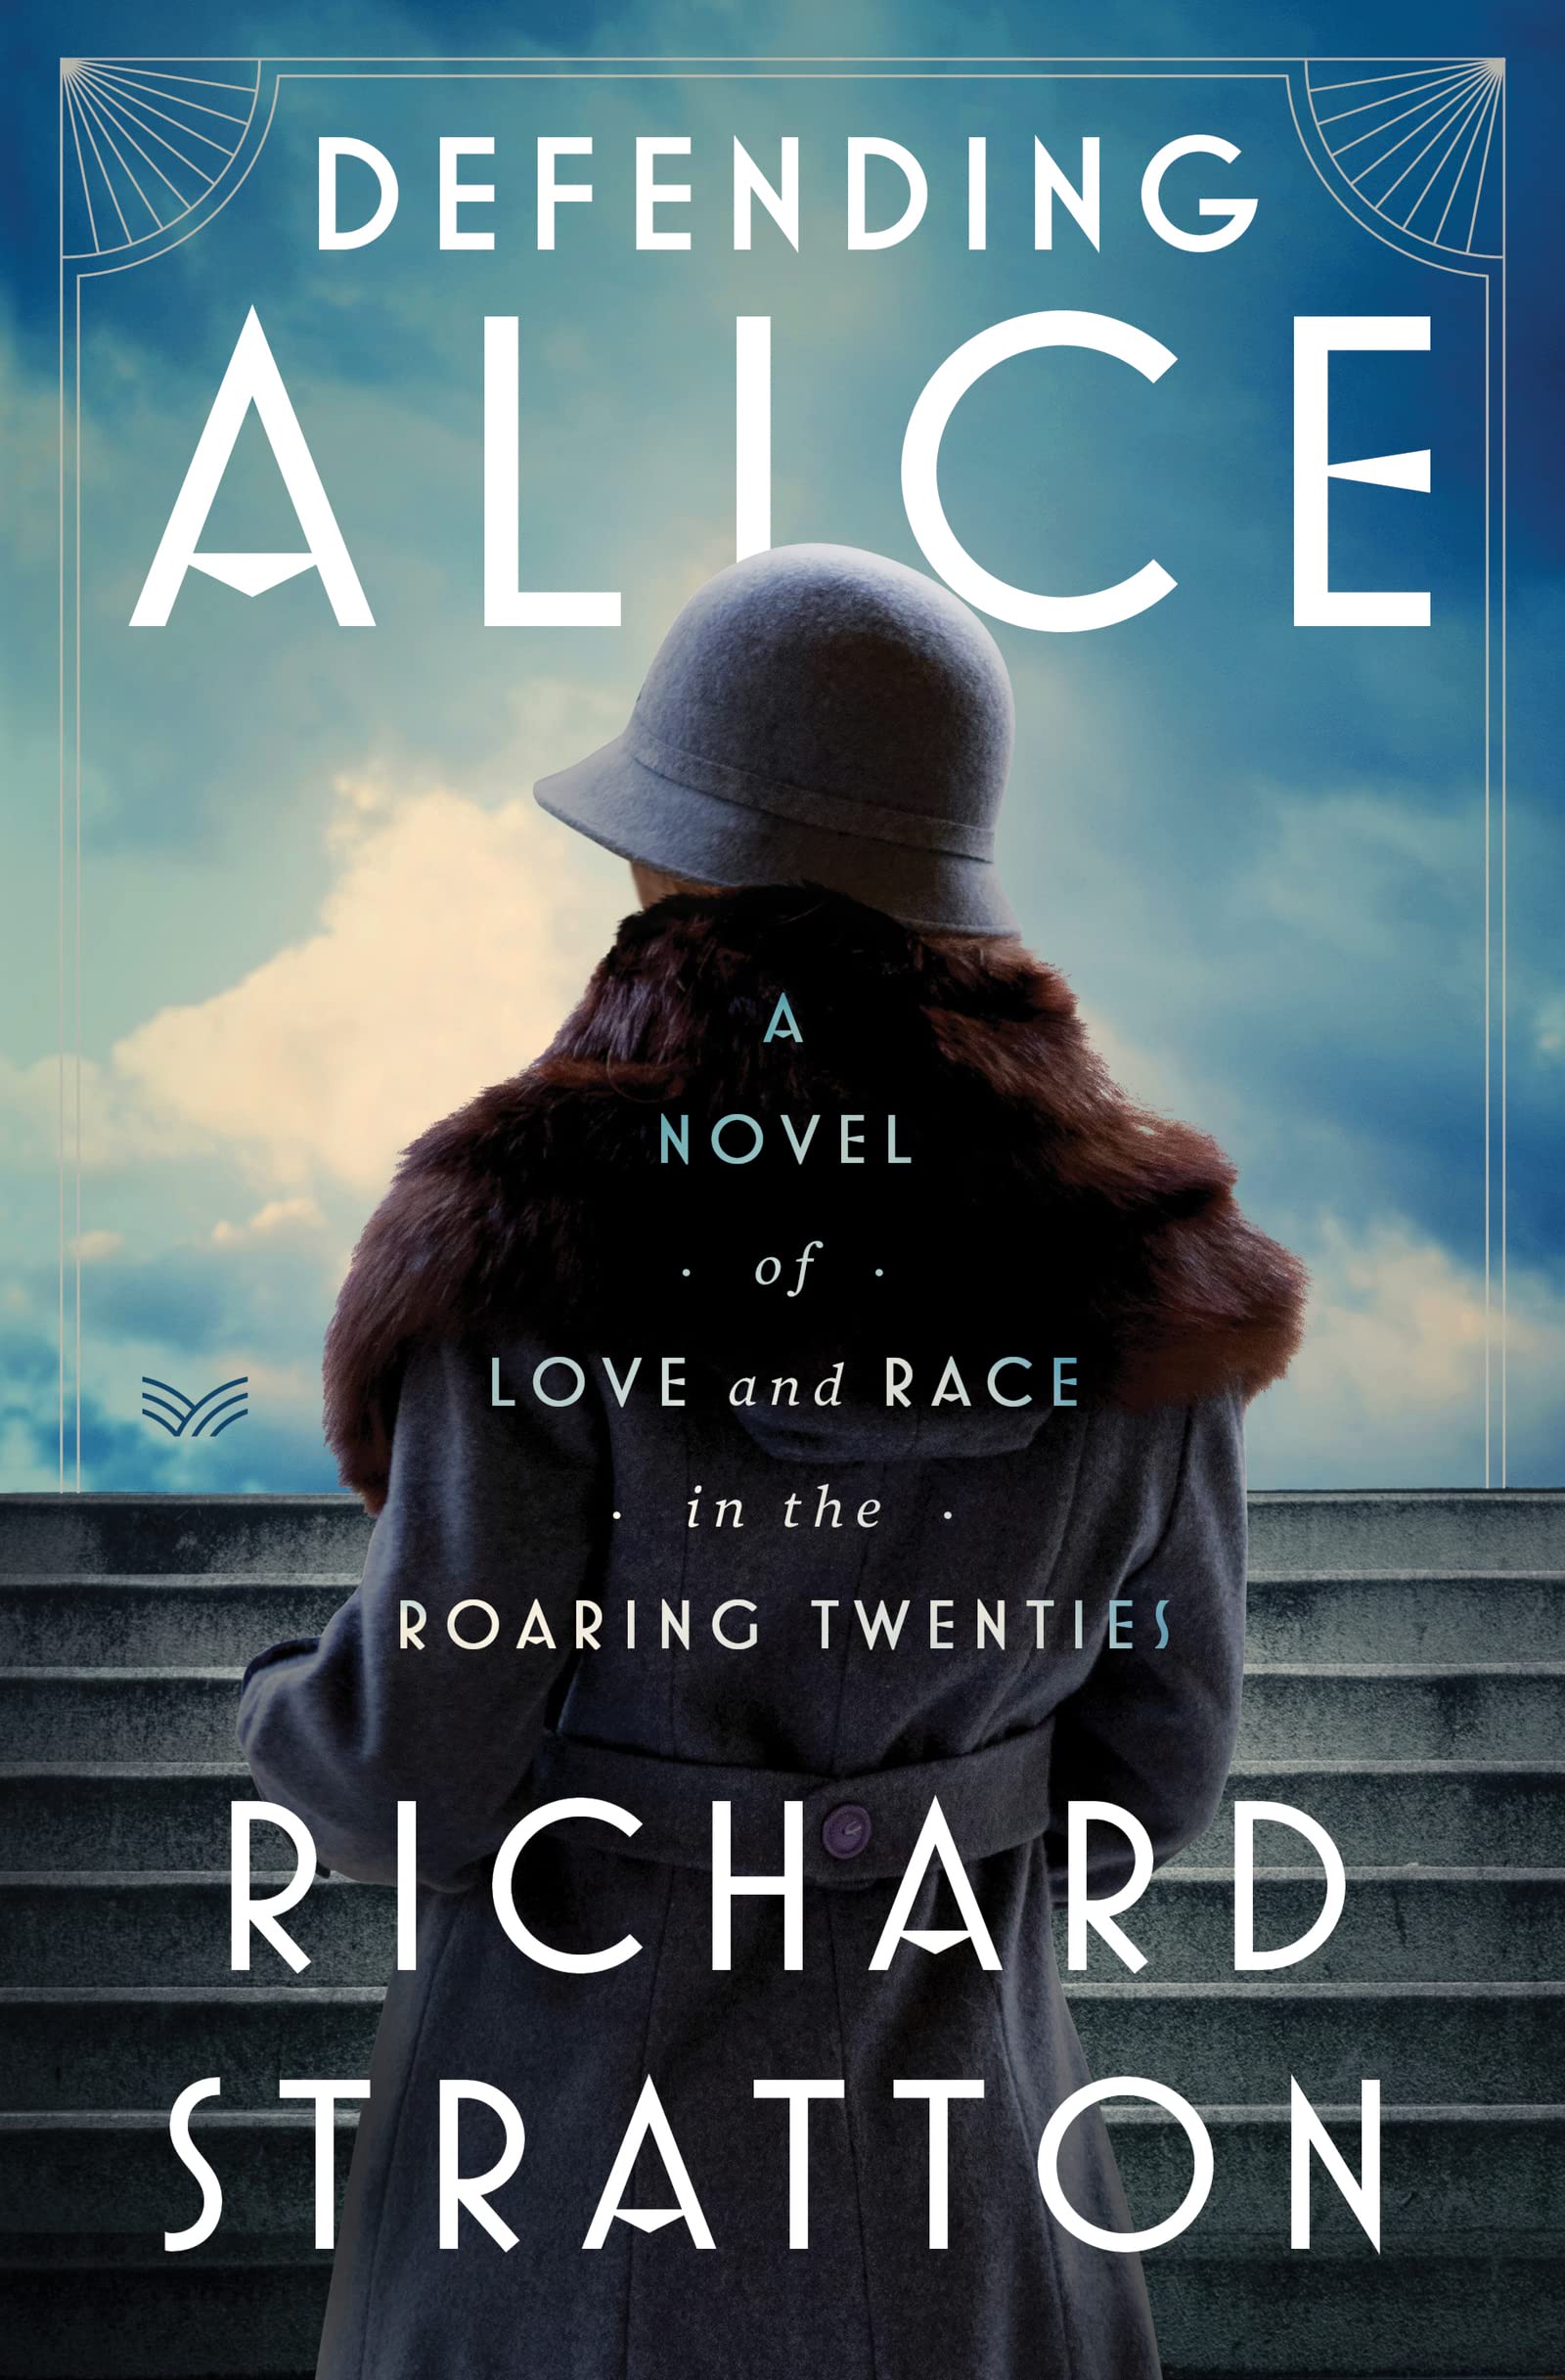 Image for "Defending Alice"